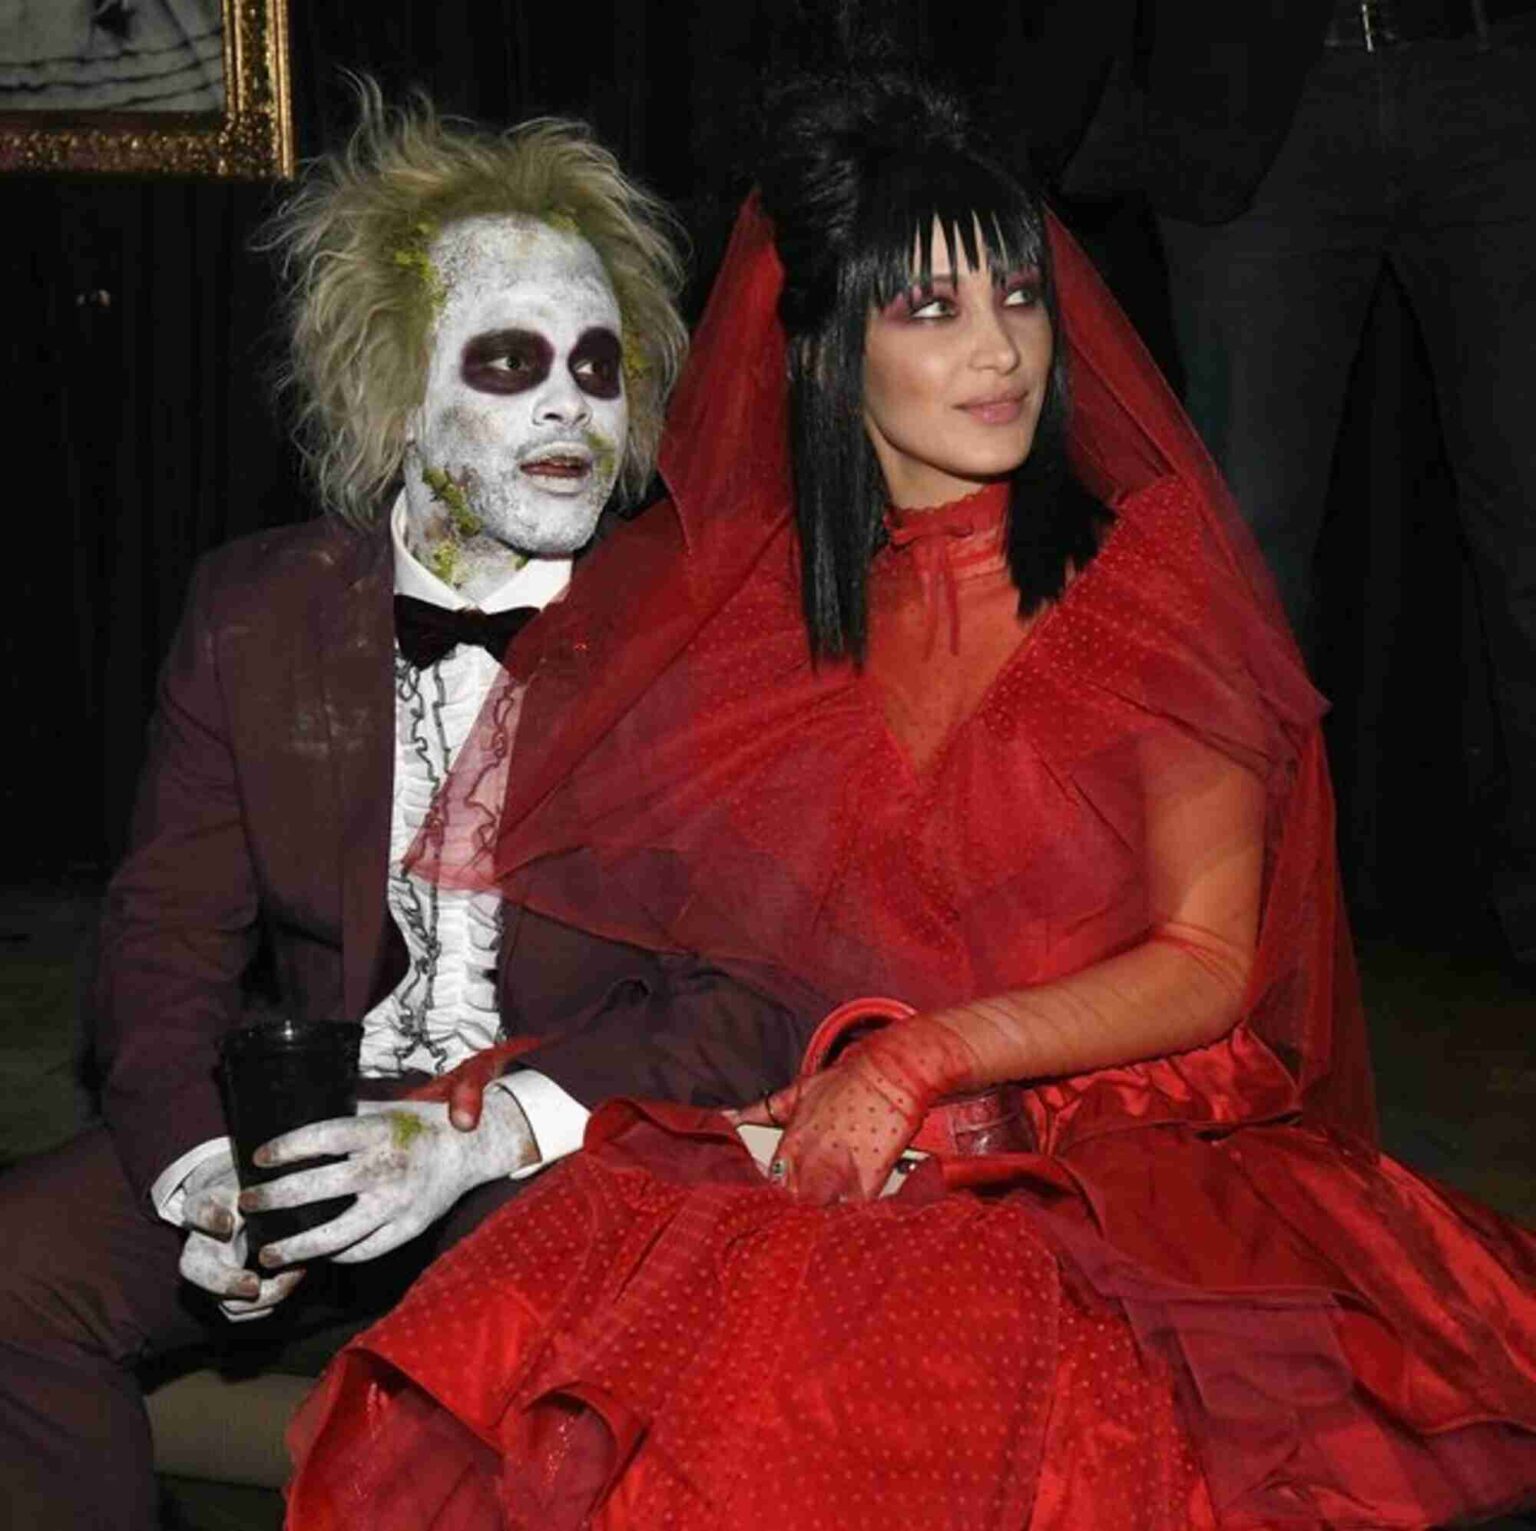 Few things are cooler than couples in DIY Halloween costumes, so why not join the fun this year? Start your scary holiday plans with these suggestions!